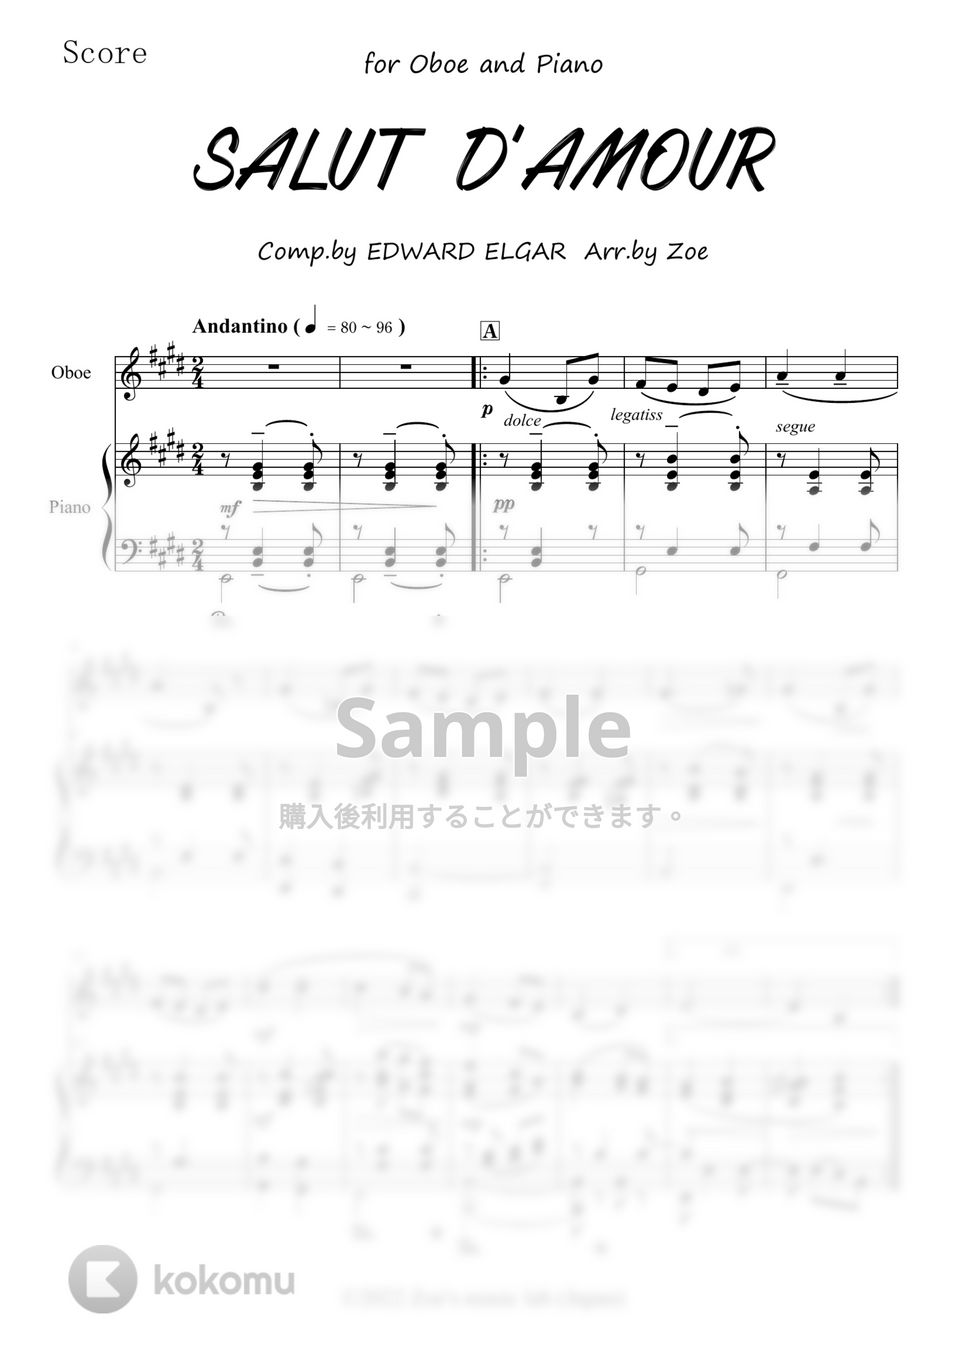 EDWARD ELGAR - 愛の挨拶 / SALUT D'AMOUR for Oboe and Piano (原調版) (オーボエ/ピアノ/愛の挨拶/エルガー) by Zoe